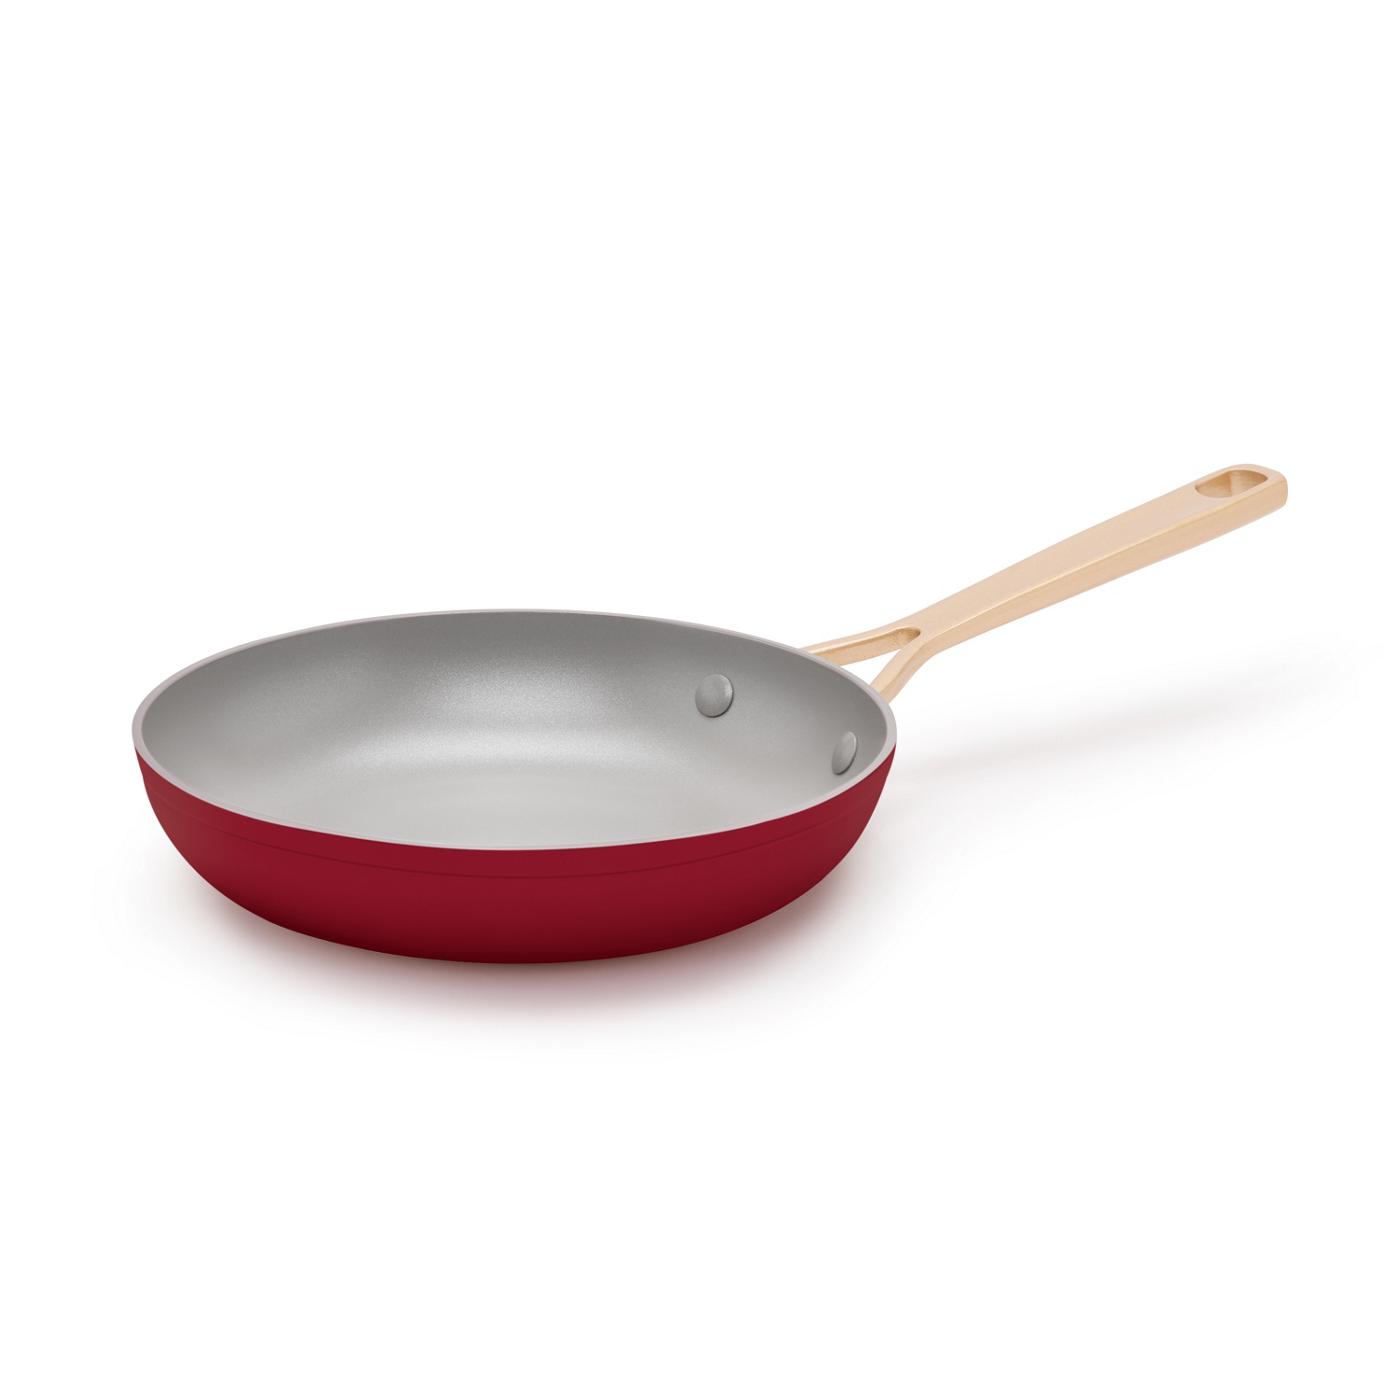 Kitchen & Table by H-E-B Non-Stick Fry Pan - Bordeaux Red; image 1 of 6